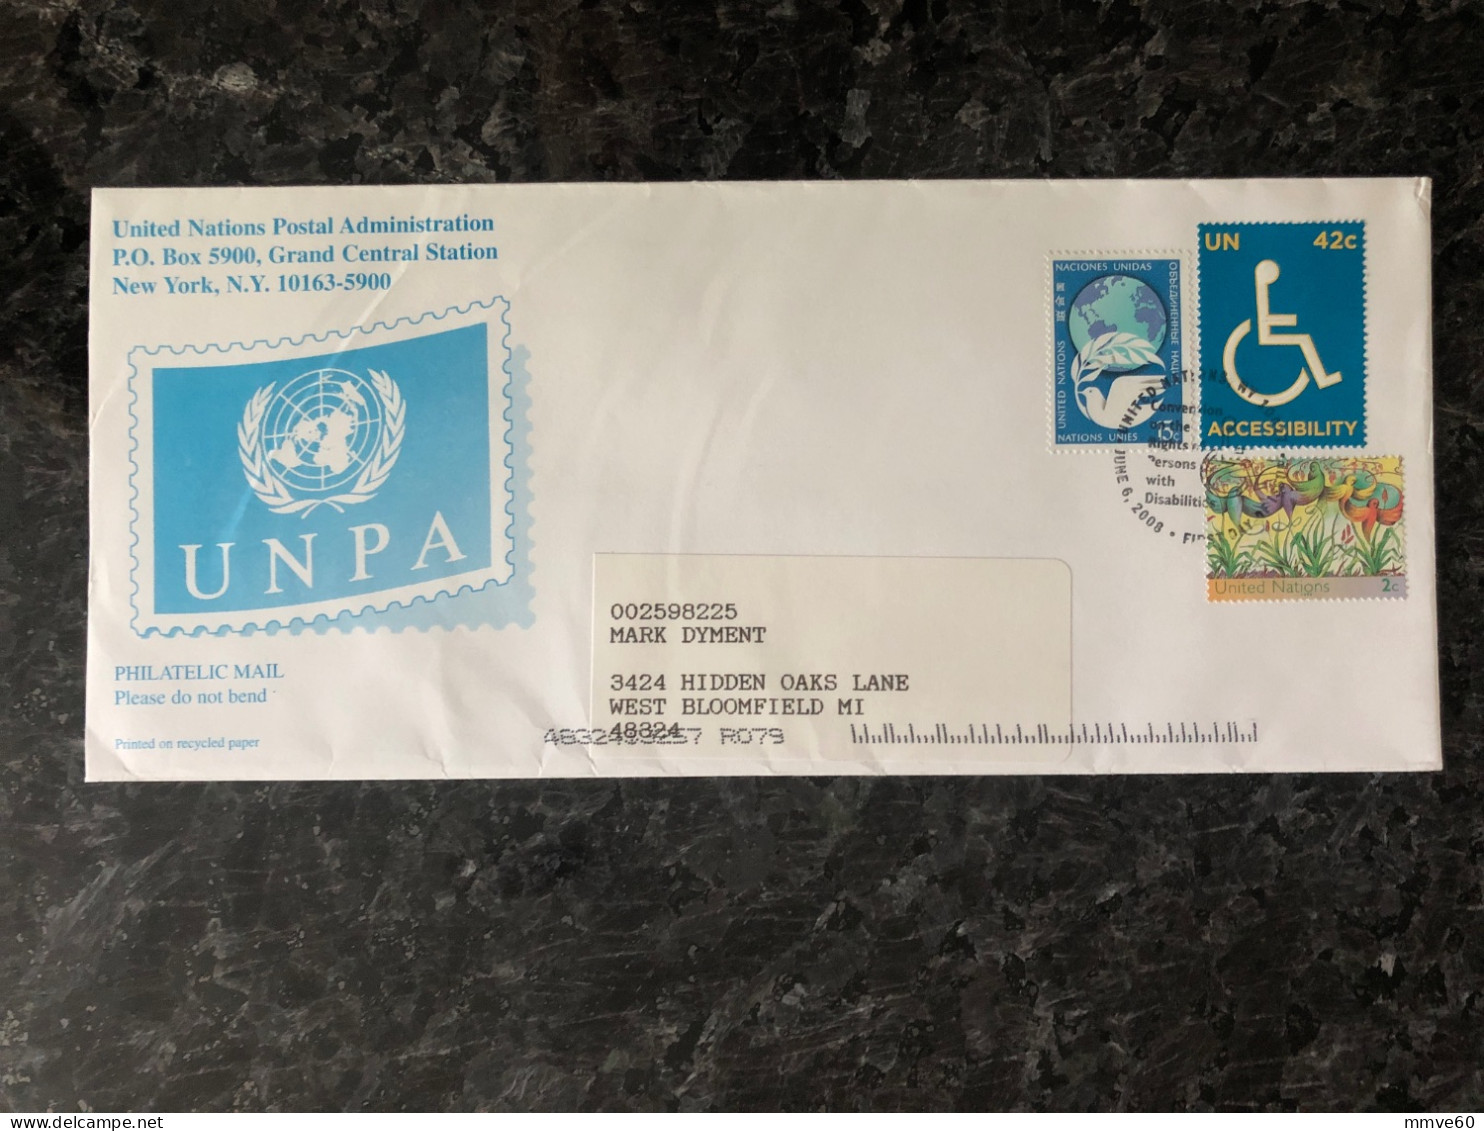 UN UNO  UNITED NATIONS TRAVELLED COVER 2008 YEAR STAMPS DISABLED MEDICINE HEALTH - Lettres & Documents